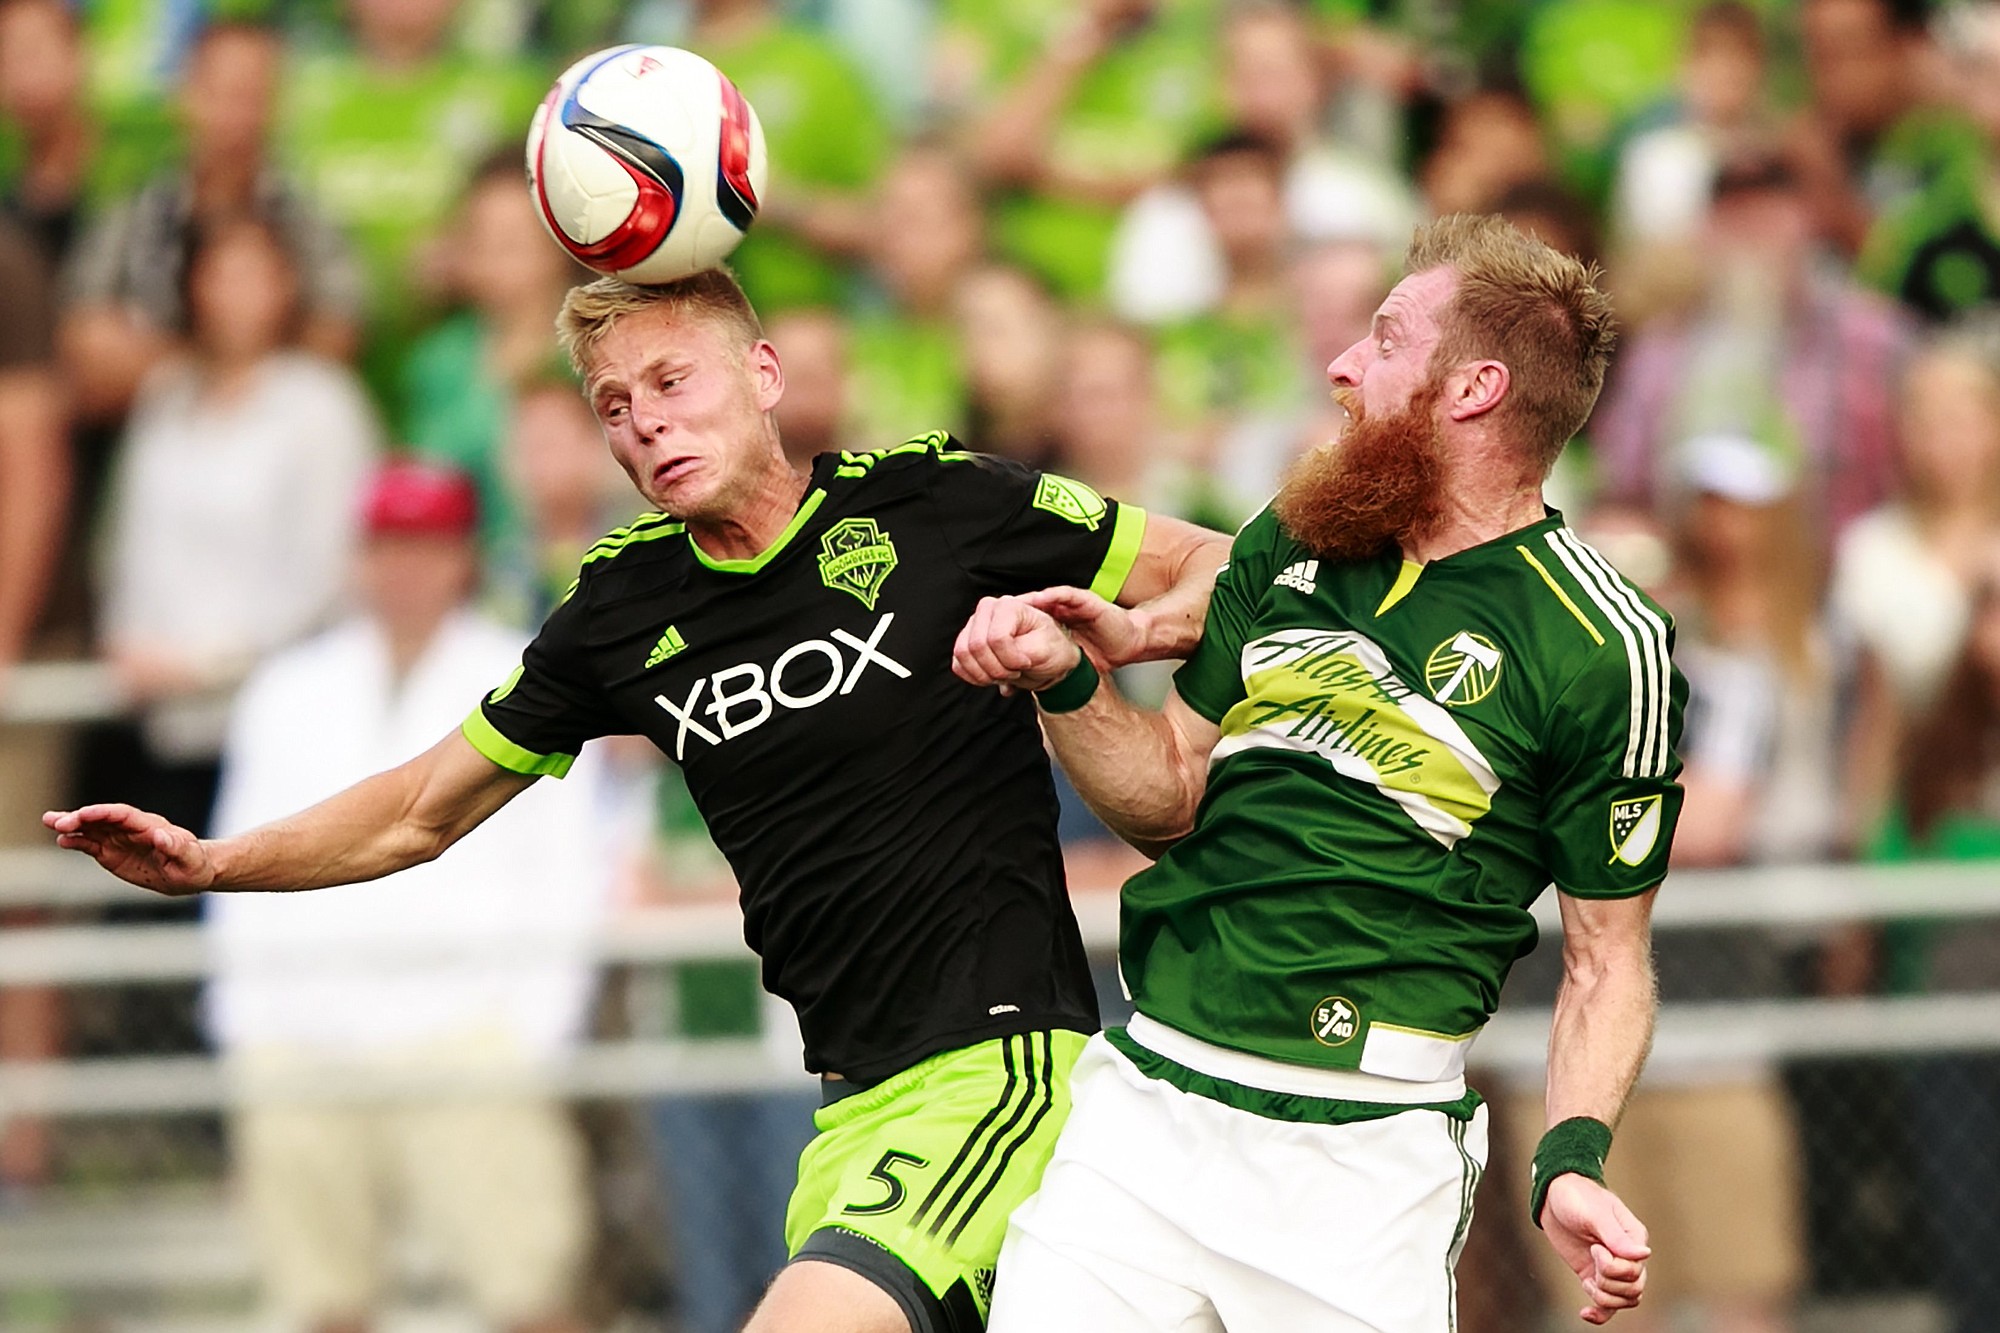 Seattle midfielder Andy Rose (5) heads the ball against Portland defender Nat Borchers Tuesday.